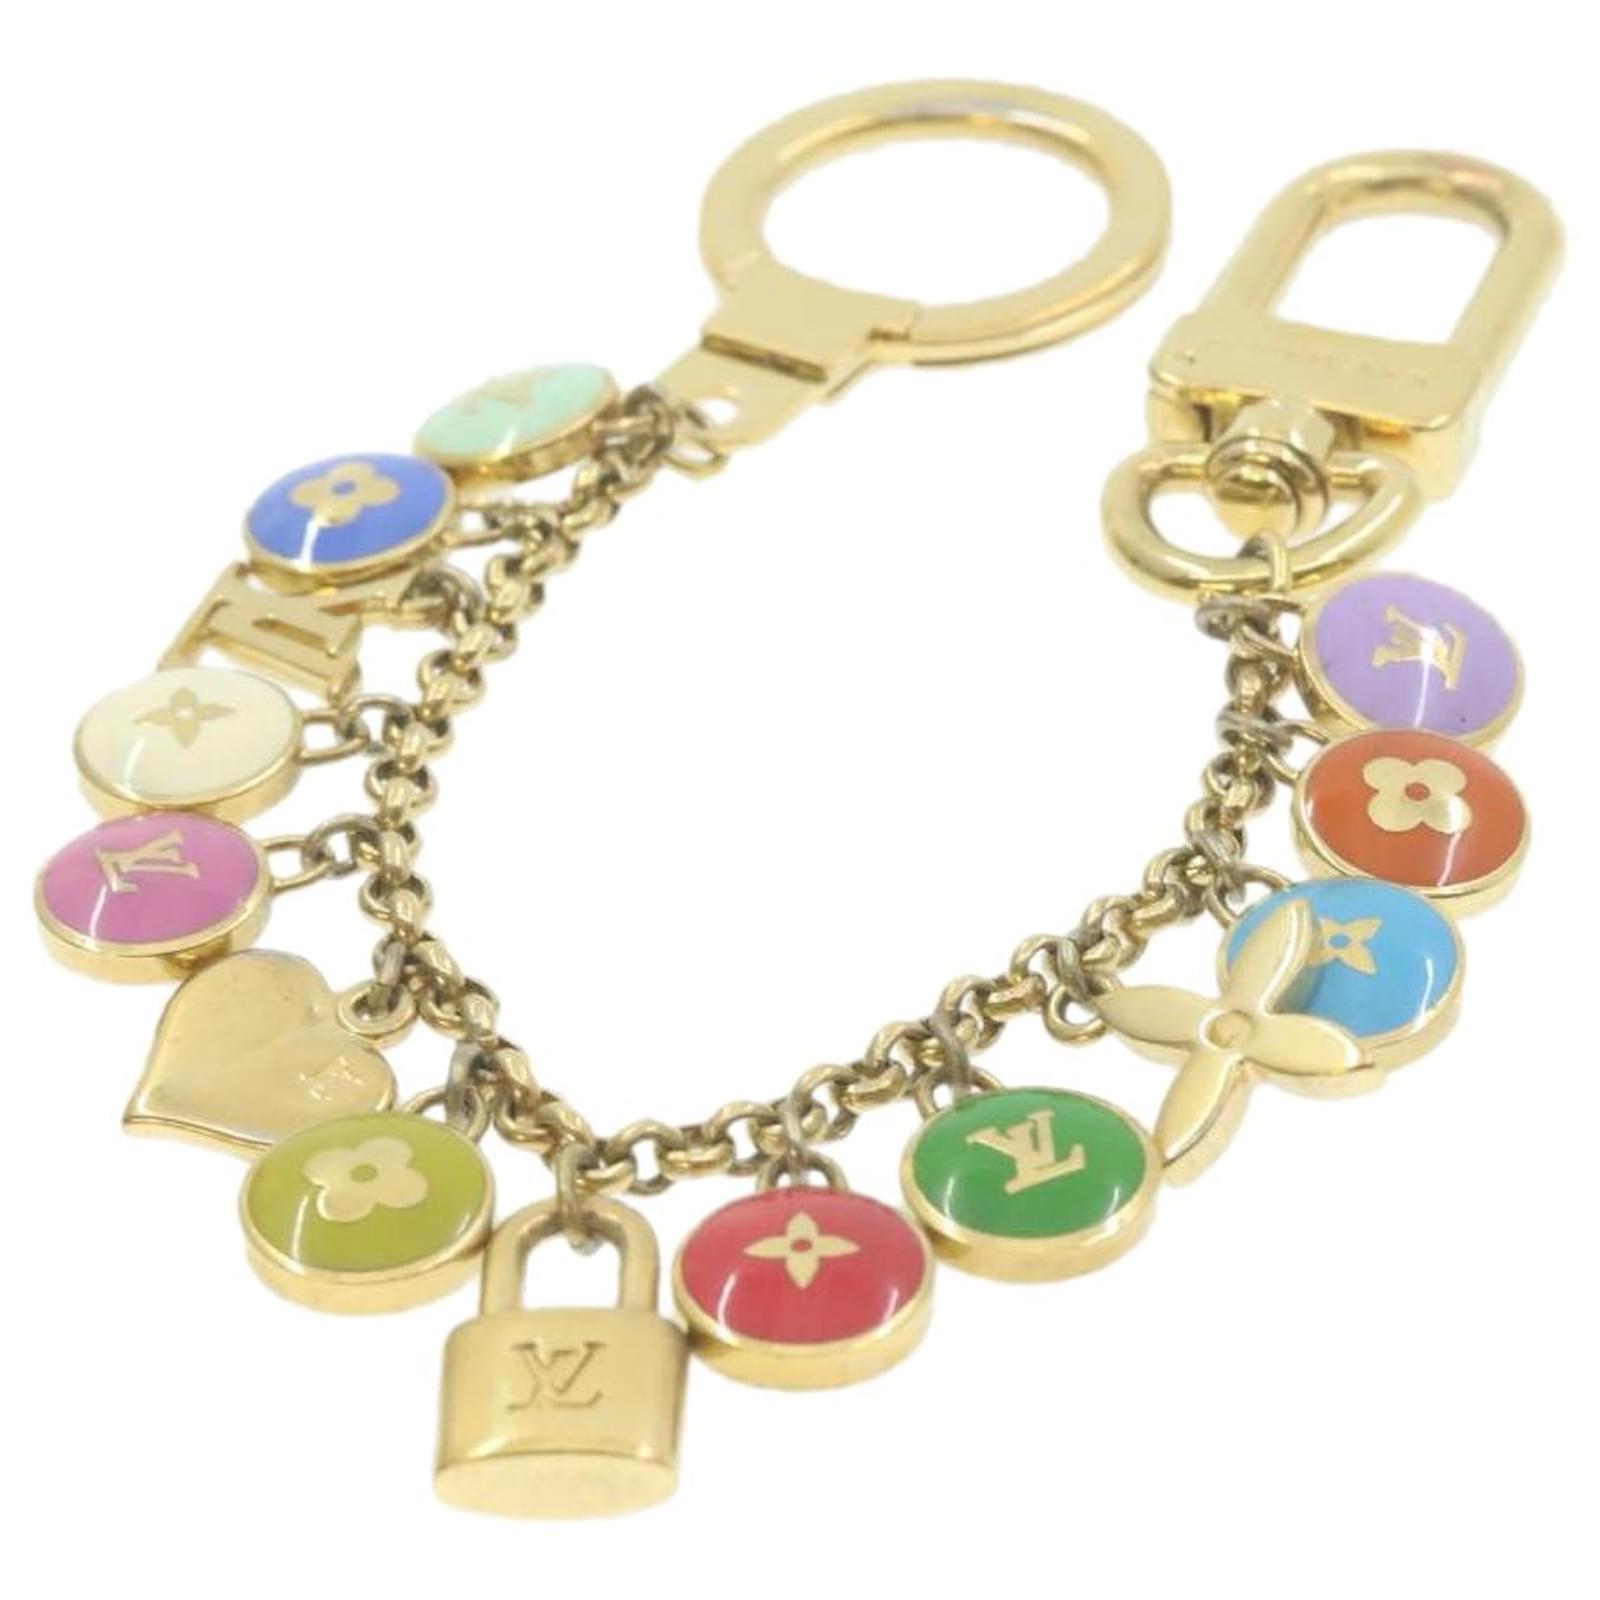 Womens Bag Charms Luxury Key Holders Keychains  LOUIS VUITTON 